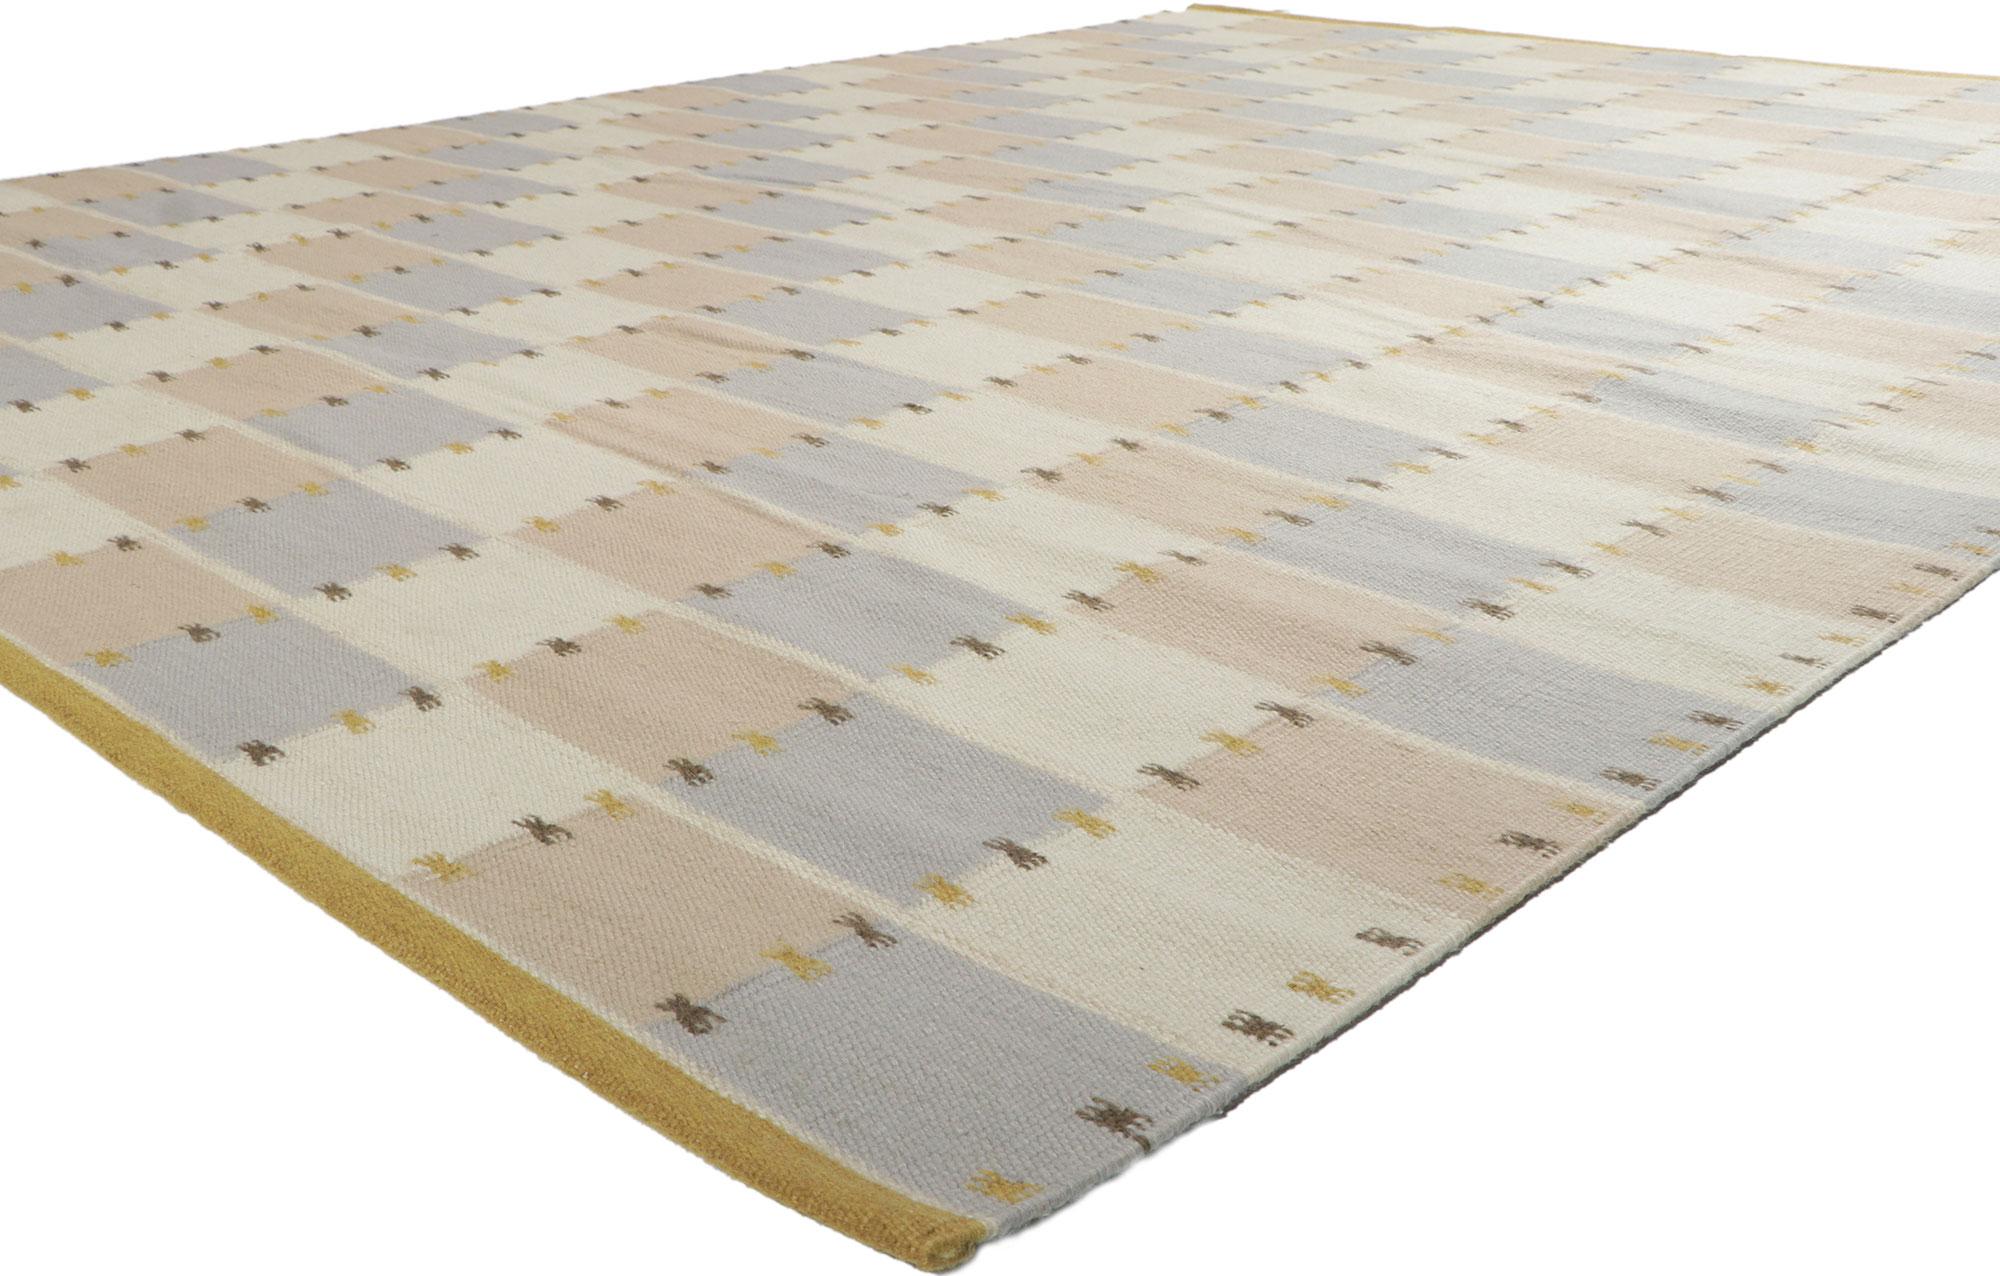 30949 New Swedish Inspired Kilim Rug, 09'01 x 09'11. Displaying simplicity with incredible detail and texture, this handwoven wool Swedish inspired Kilim rug provides a feeling of cozy contentment without the clutter. The eye-catching checked design